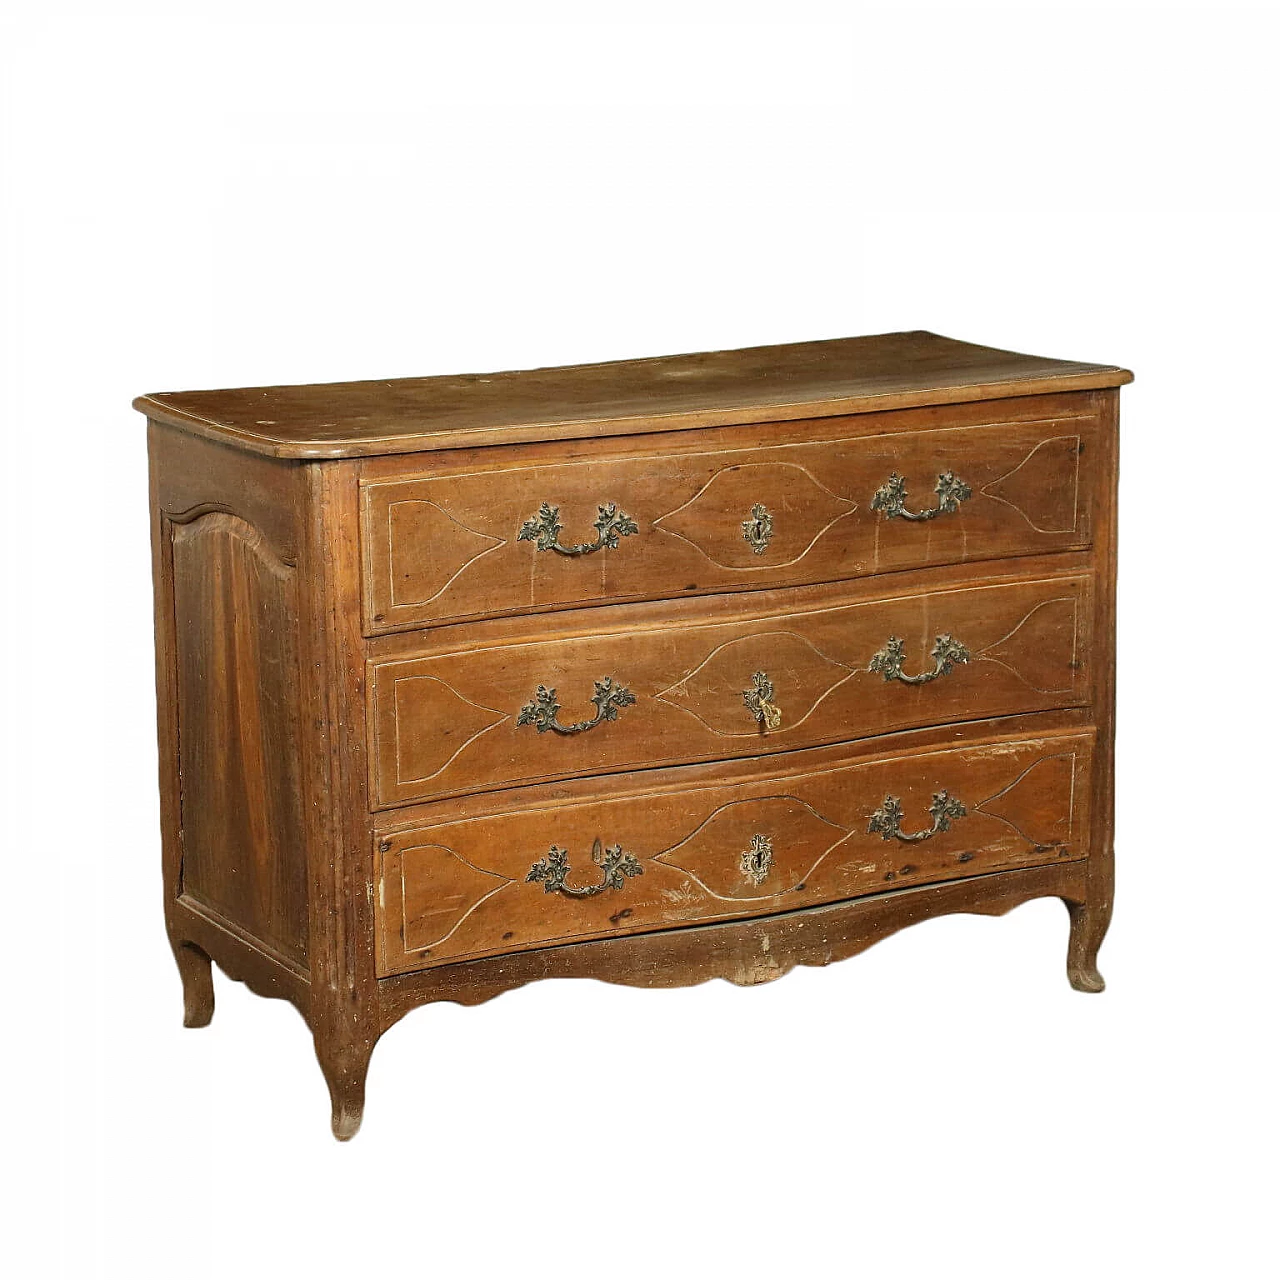 Parma Baroque chest of drawers in walnut, '700 1